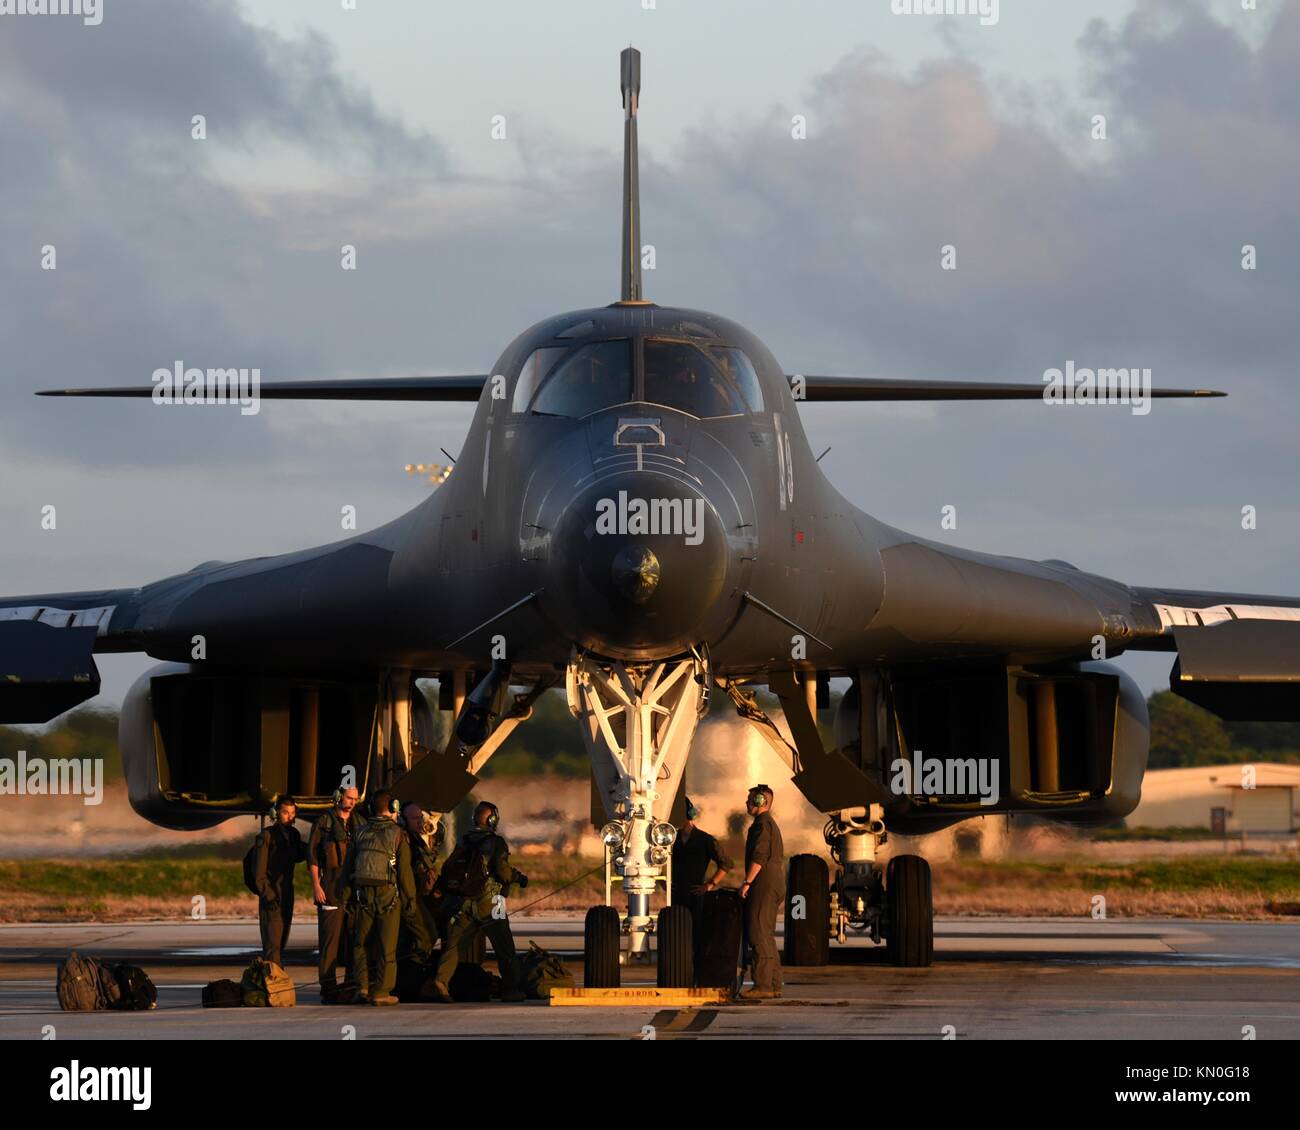 A U.S. Air Force B-1B Lancer strategic bomber aircraft prepares to take off from the runway at the Anderson Air Force Base November 27, 2017 in Yigo, Guam.  (photo by Gerald R. Willis via Planetpix) Stock Photo